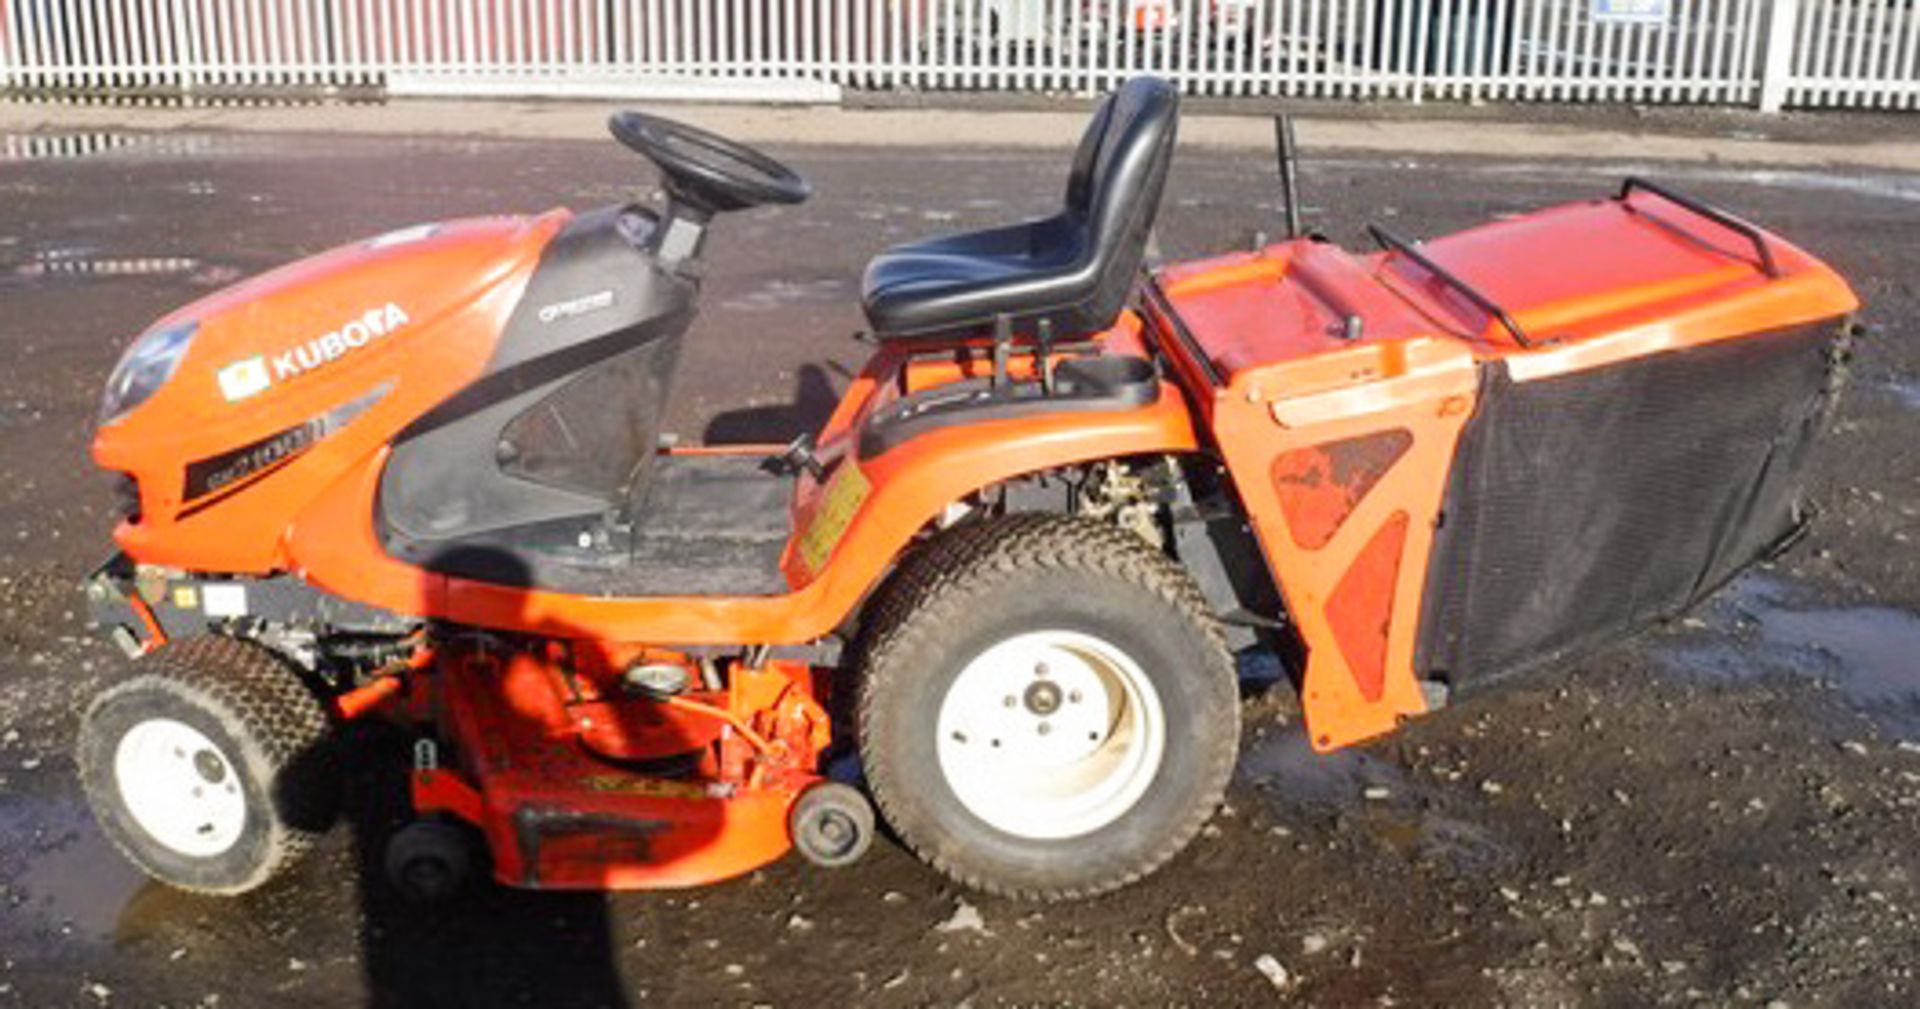 2006 KUBOTA GR2100, 4WD DIESEL RIDE ON CUT & COLLECT GRASS CUTTER, 48INCH CUTTING DECK, 786HRS (NOT - Image 11 of 12